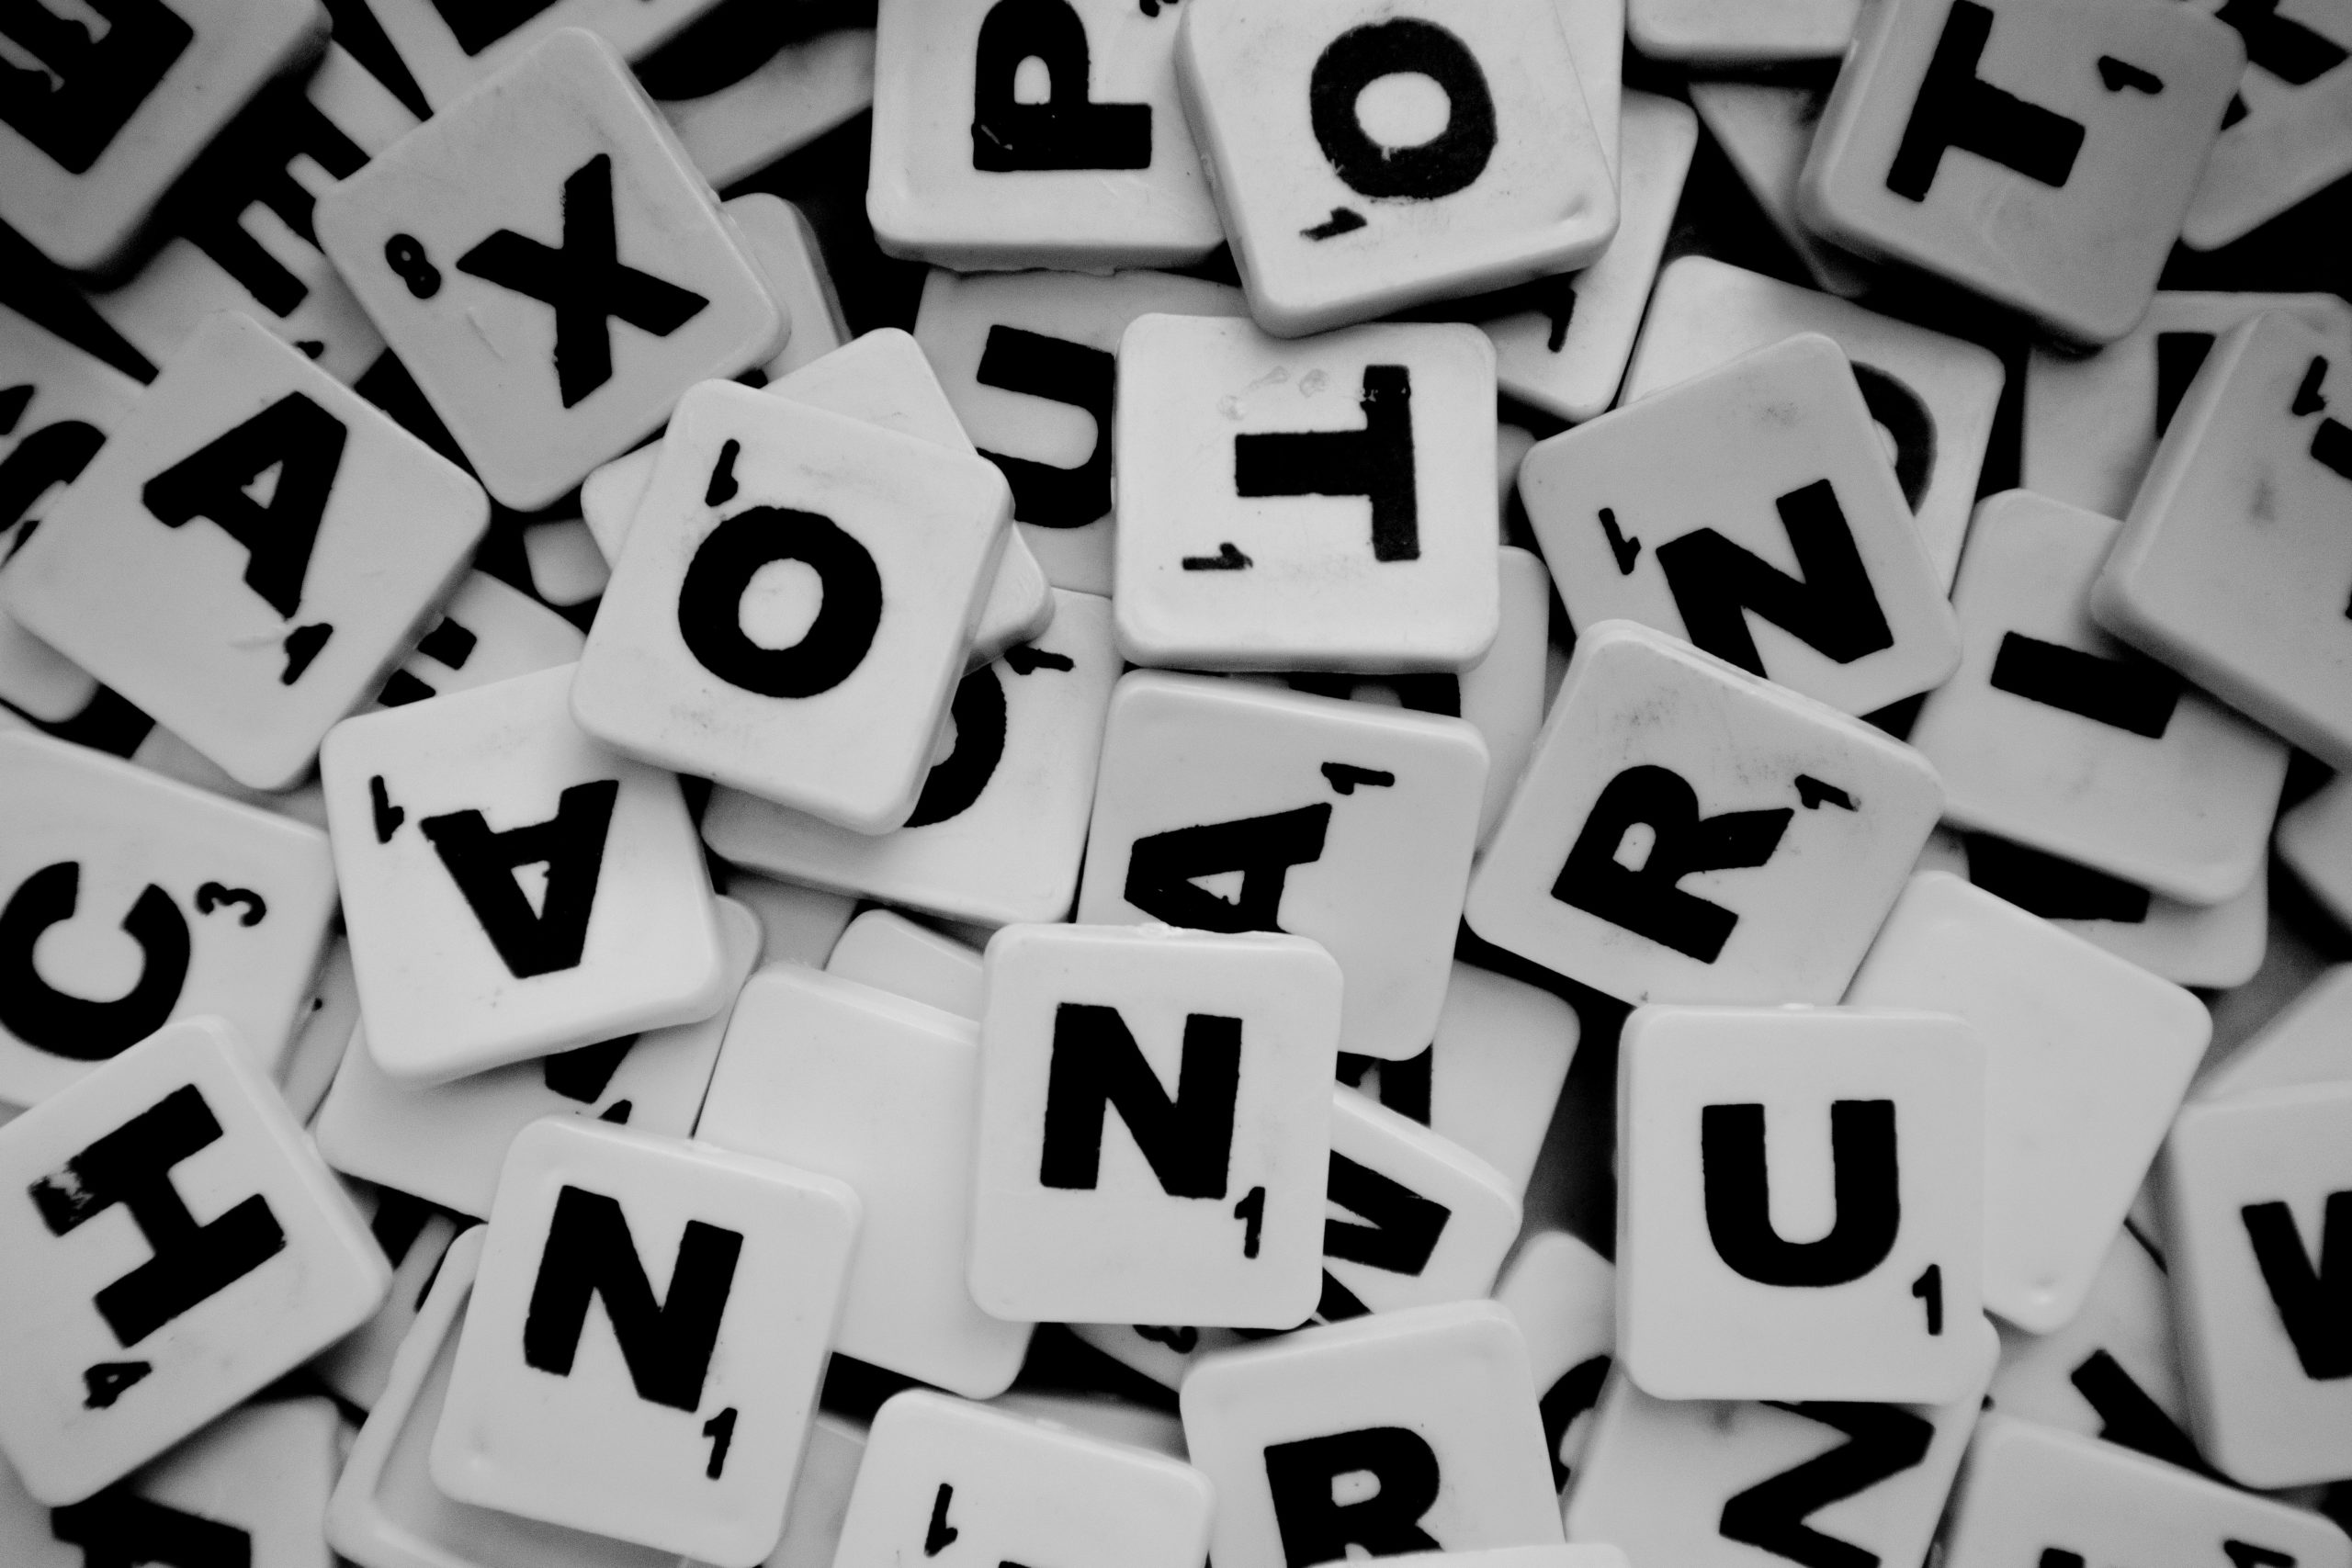 Pile of Scrabble tiles with letters